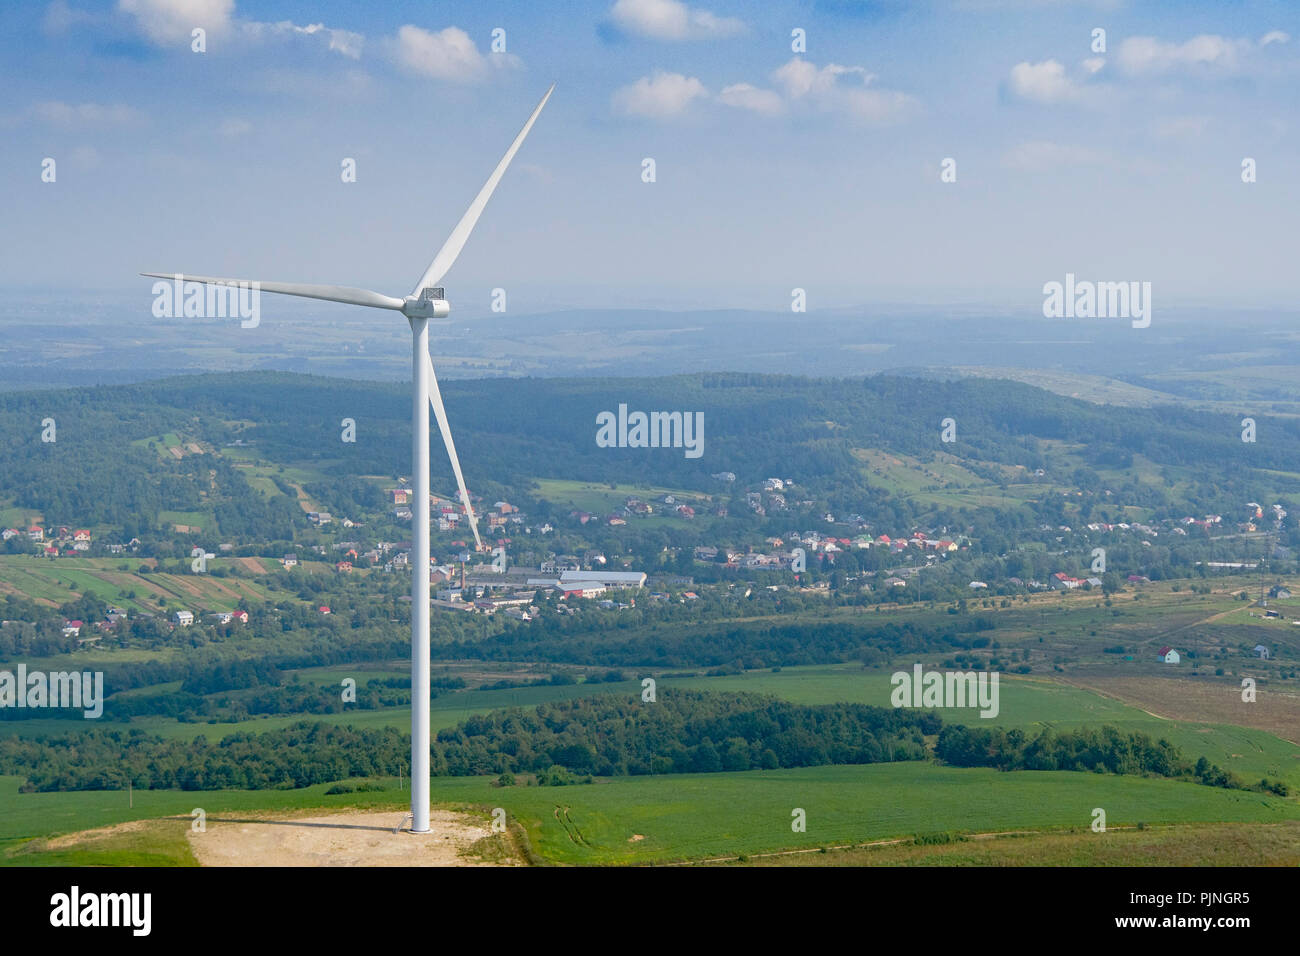 Wind turbine from aerial view - Sustainable development, environment friendly, renewable energy concept. Stock Photo